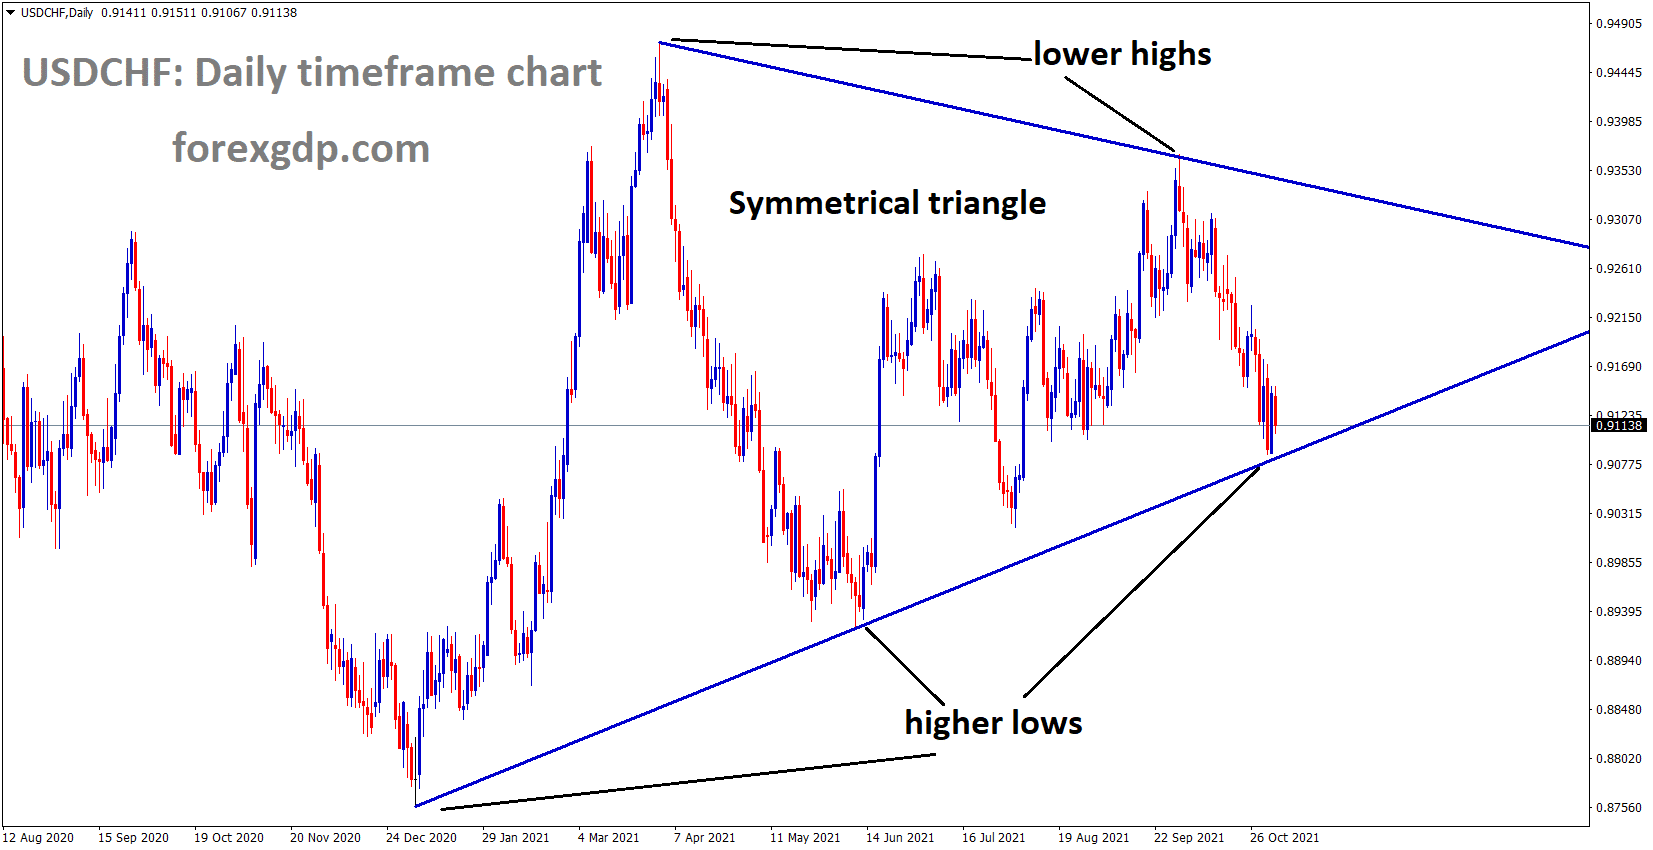 USDCHF is moving in the Symmetrical triangle pattern 2